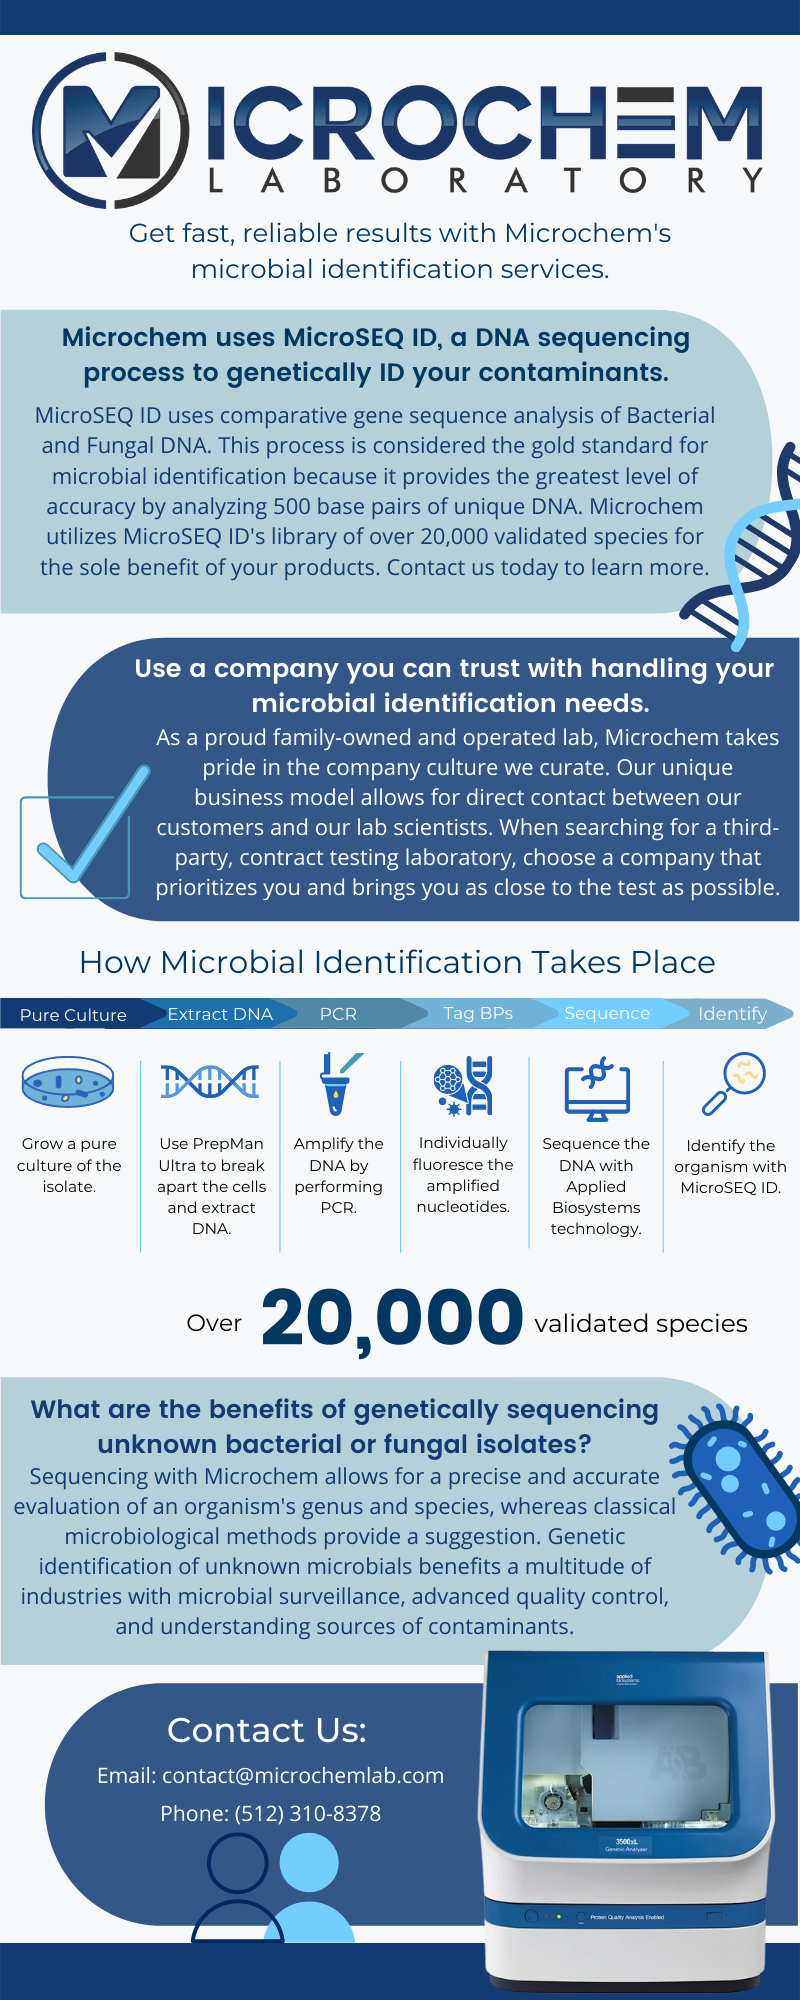 Microchem's Microbial Sequencing at a Glance